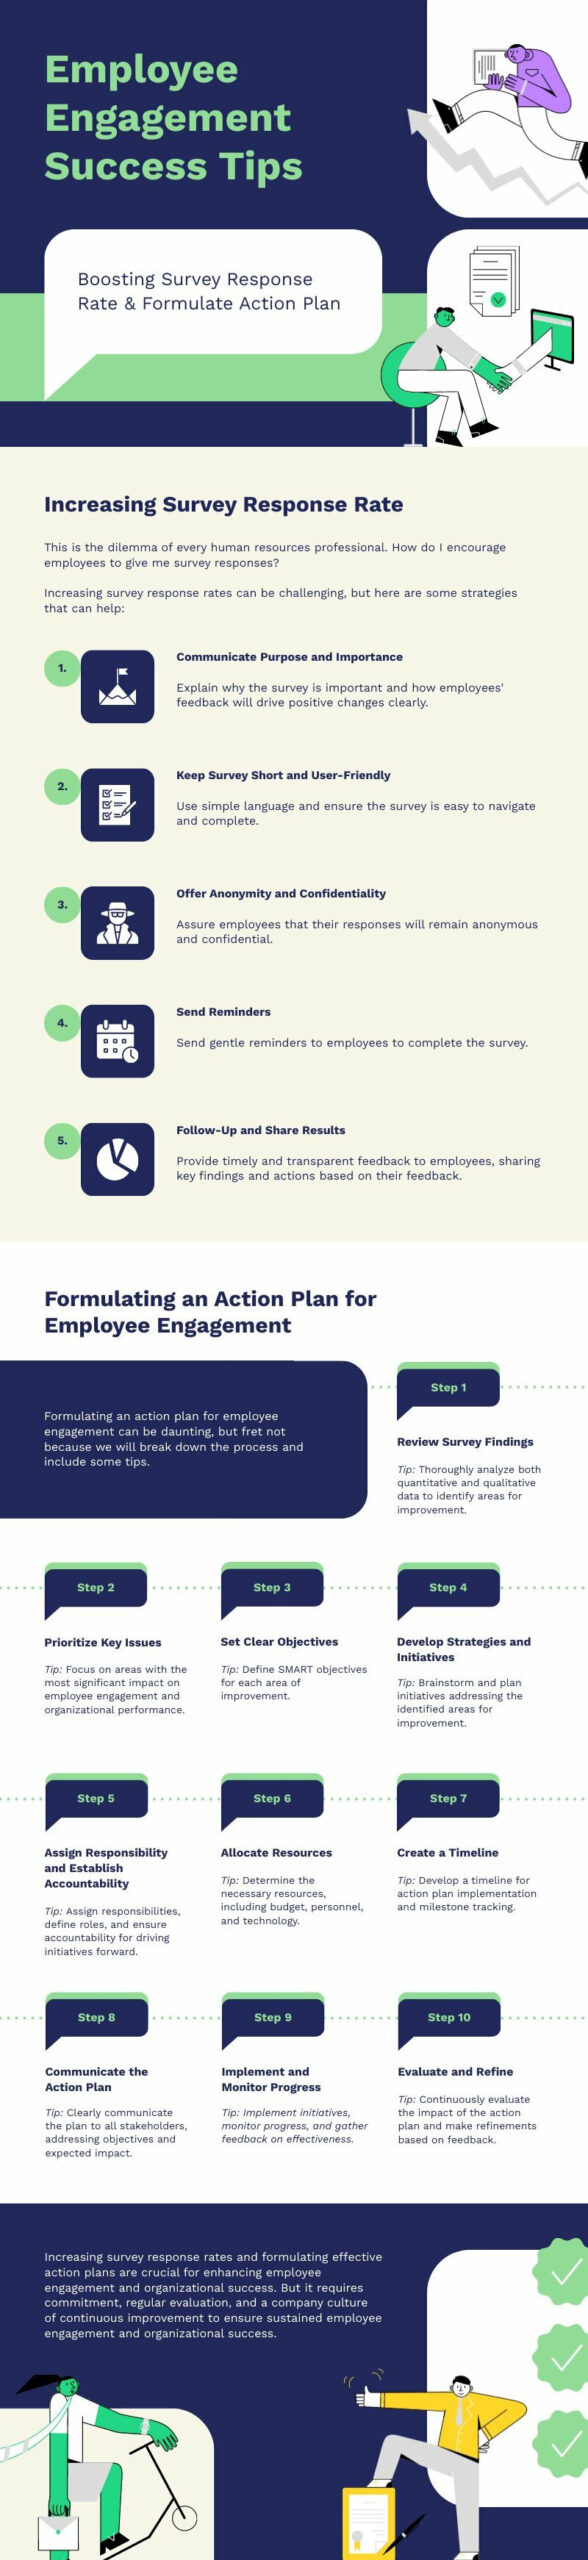 infographic template with a few tips about increasing engagement surveys response rate